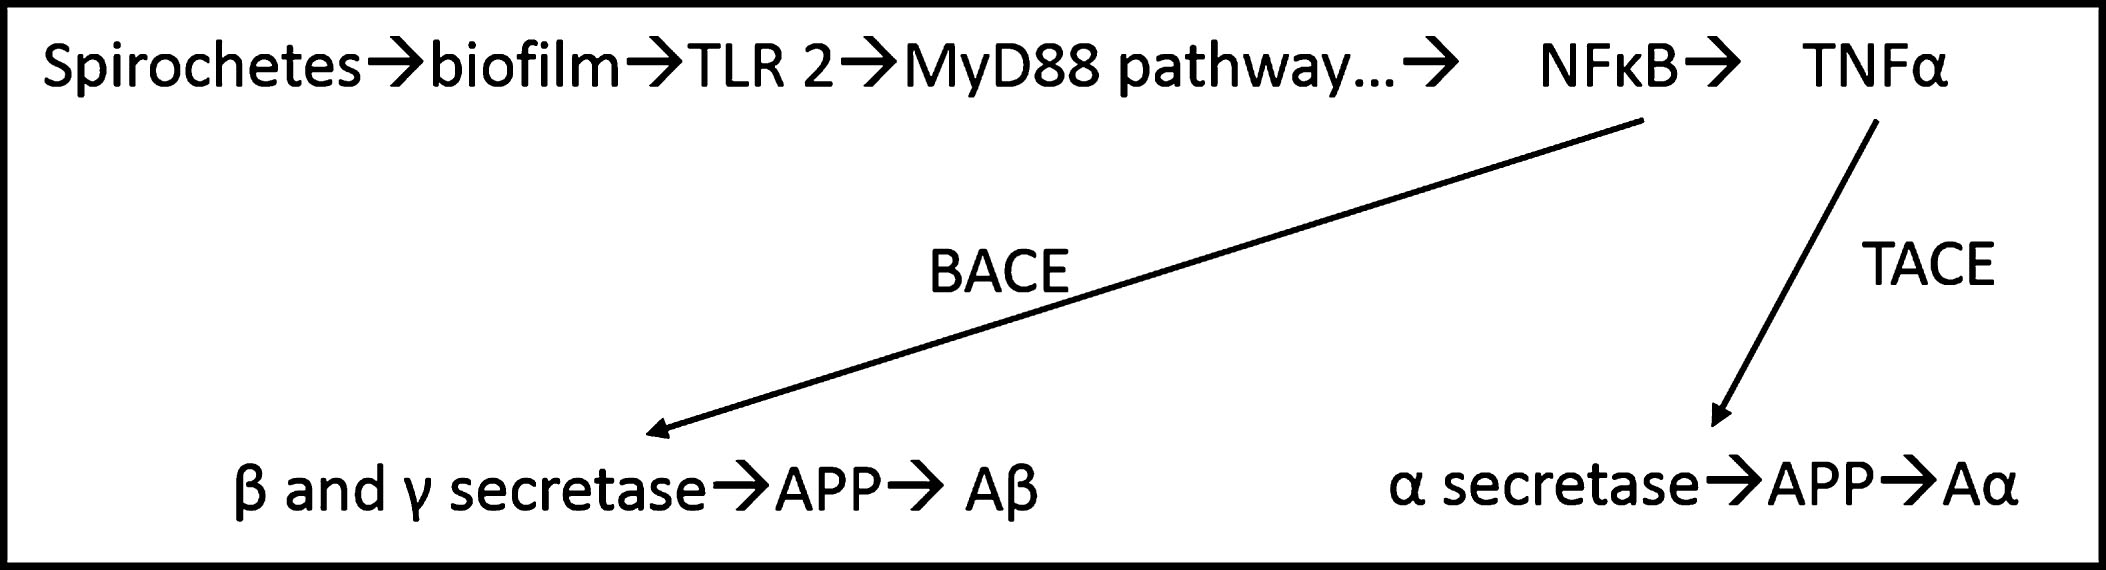 Possible pathway for development of Aβ. Schematic for production of Aβ and Aα via MyD88 pathway. From Allen et al. [8].